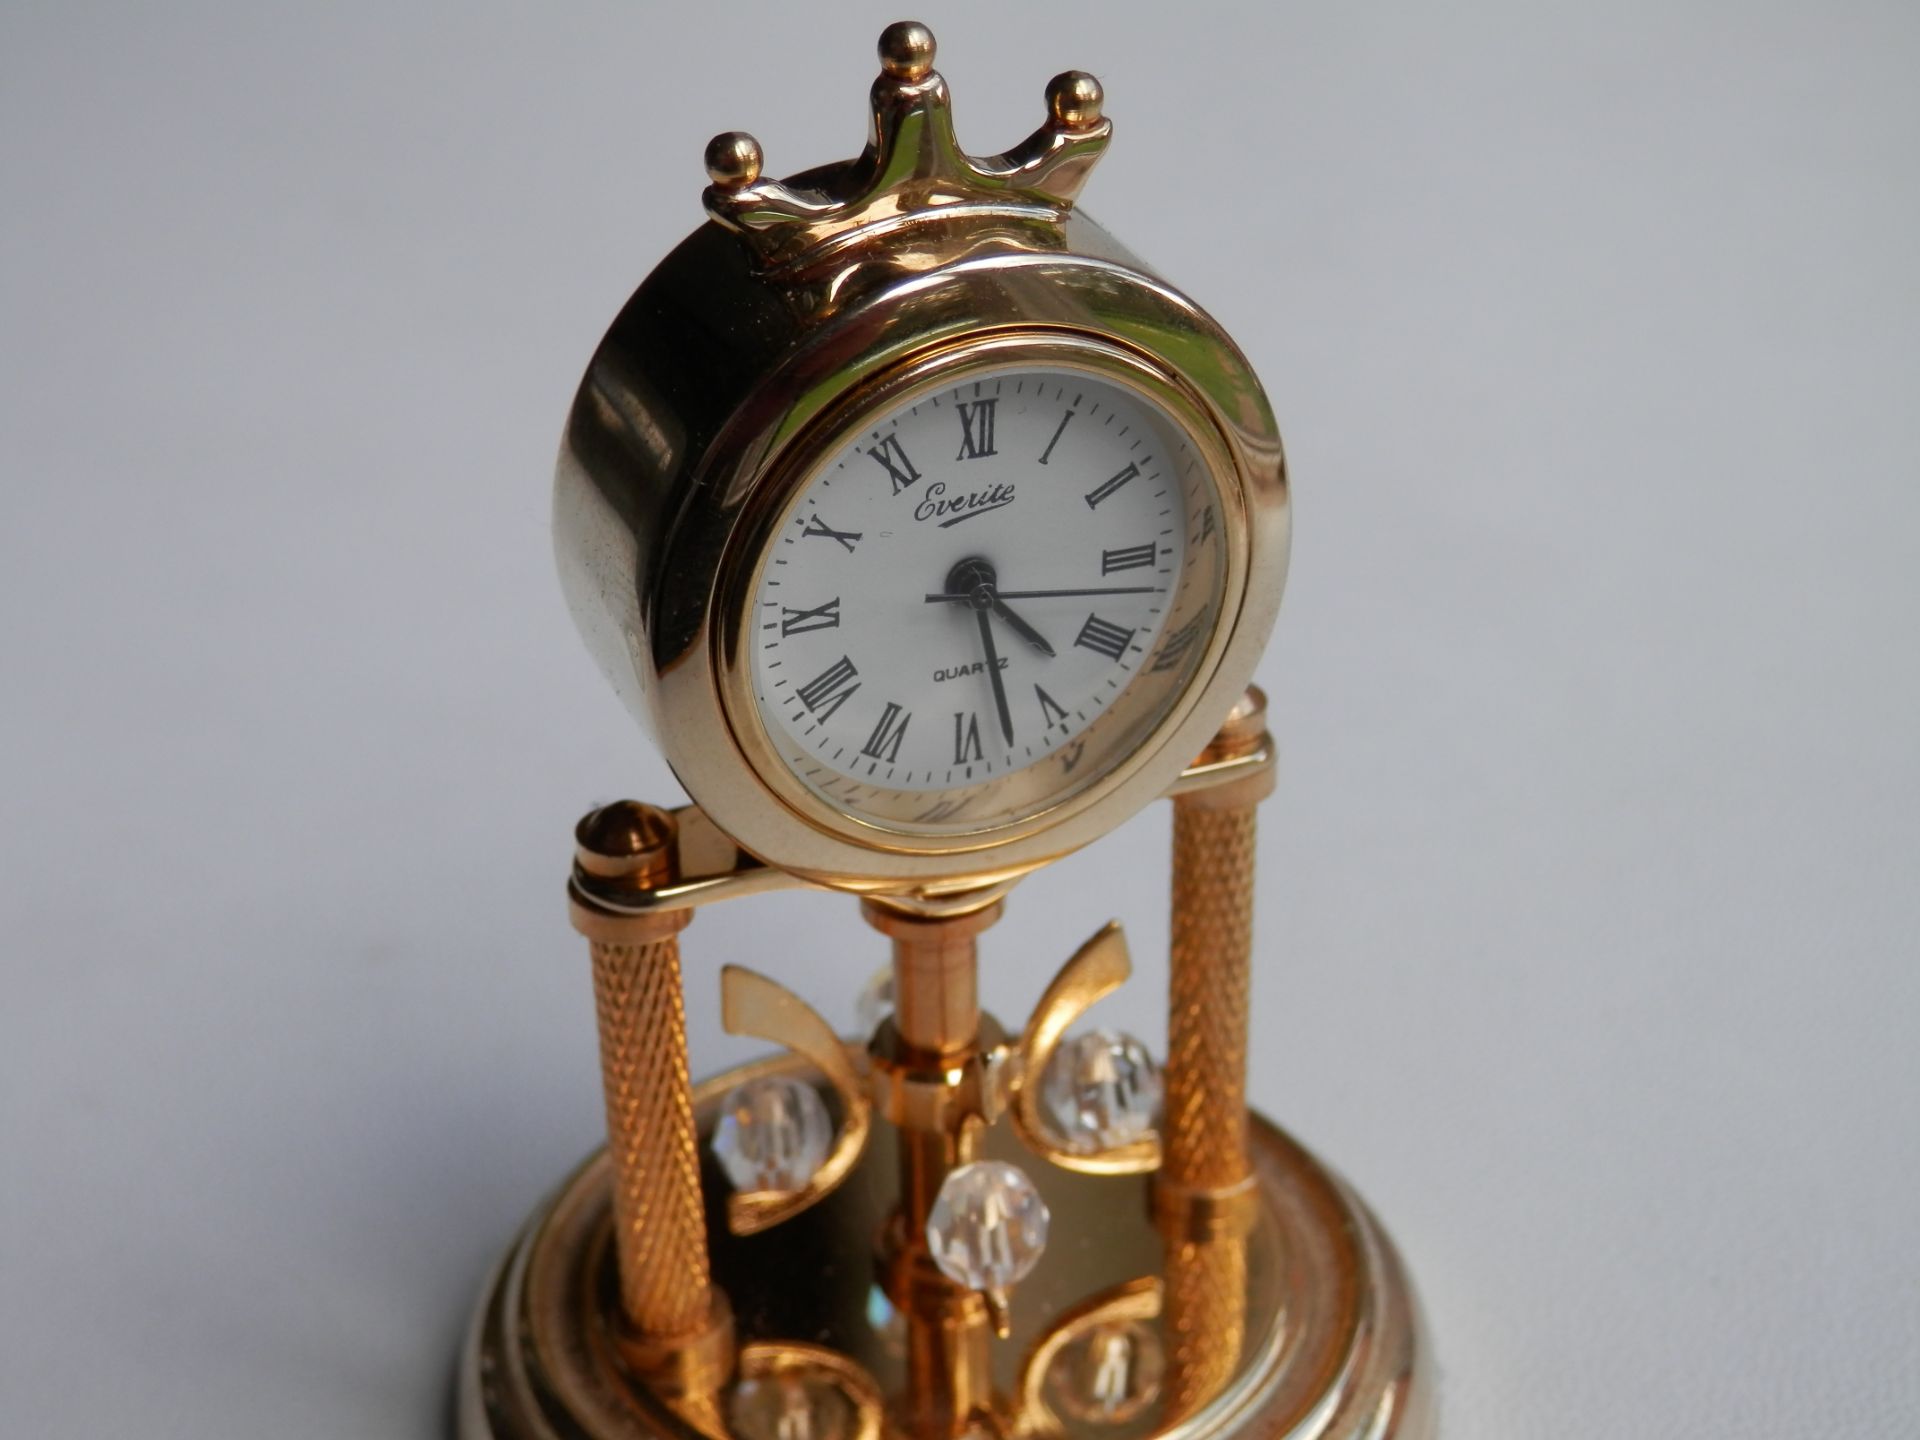 LOVELY 3" EVERITE WORKING BRASS ANNIVERSARY QUARTZ MINIATURE CLOCK WITH GLASS DOME & CASE. - Image 3 of 4